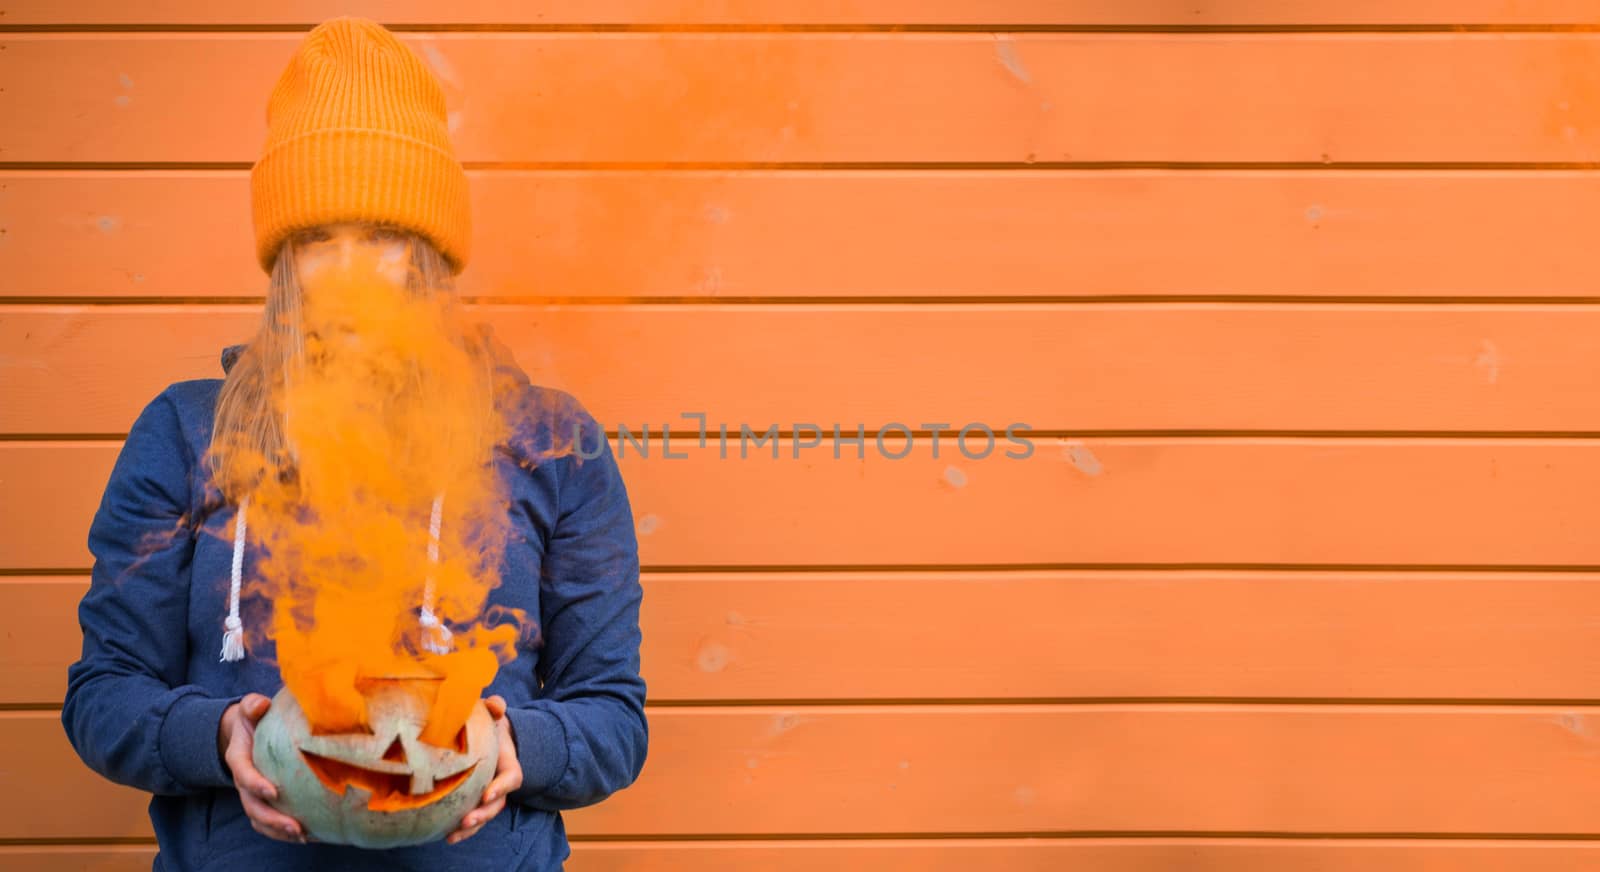 Woman in casual clothes and beanie holding Halloween pumpkin over orange wall background with copy space for text